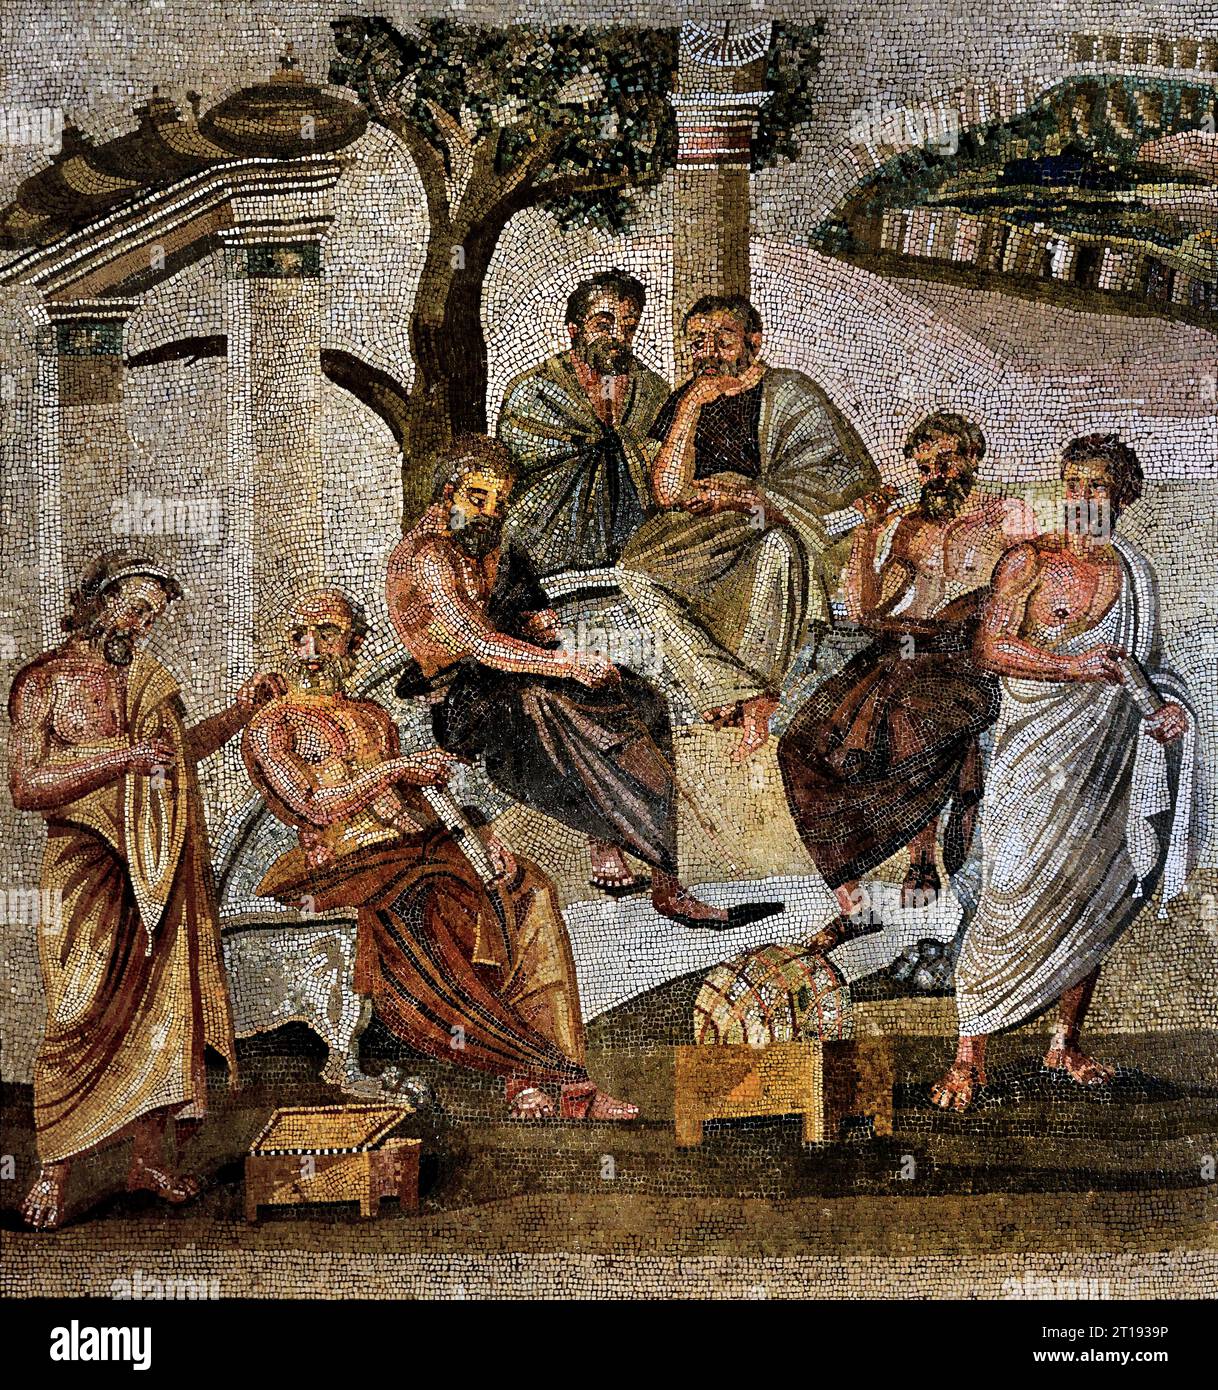 Plato Conversing with his Pupils, ( Plato was an Athenian philosopher during the Classical period in Ancient Greece, founder of the Platonist  )  from the House of T. Siminius, mosaic from Pompeii Roman City is located near Naples in the Campania region of Italy. Pompeii was buried under 4-6 m of volcanic ash and pumice in the eruption of Mount Vesuvius in AD 79. Italy, Museum, Naples, Stock Photo